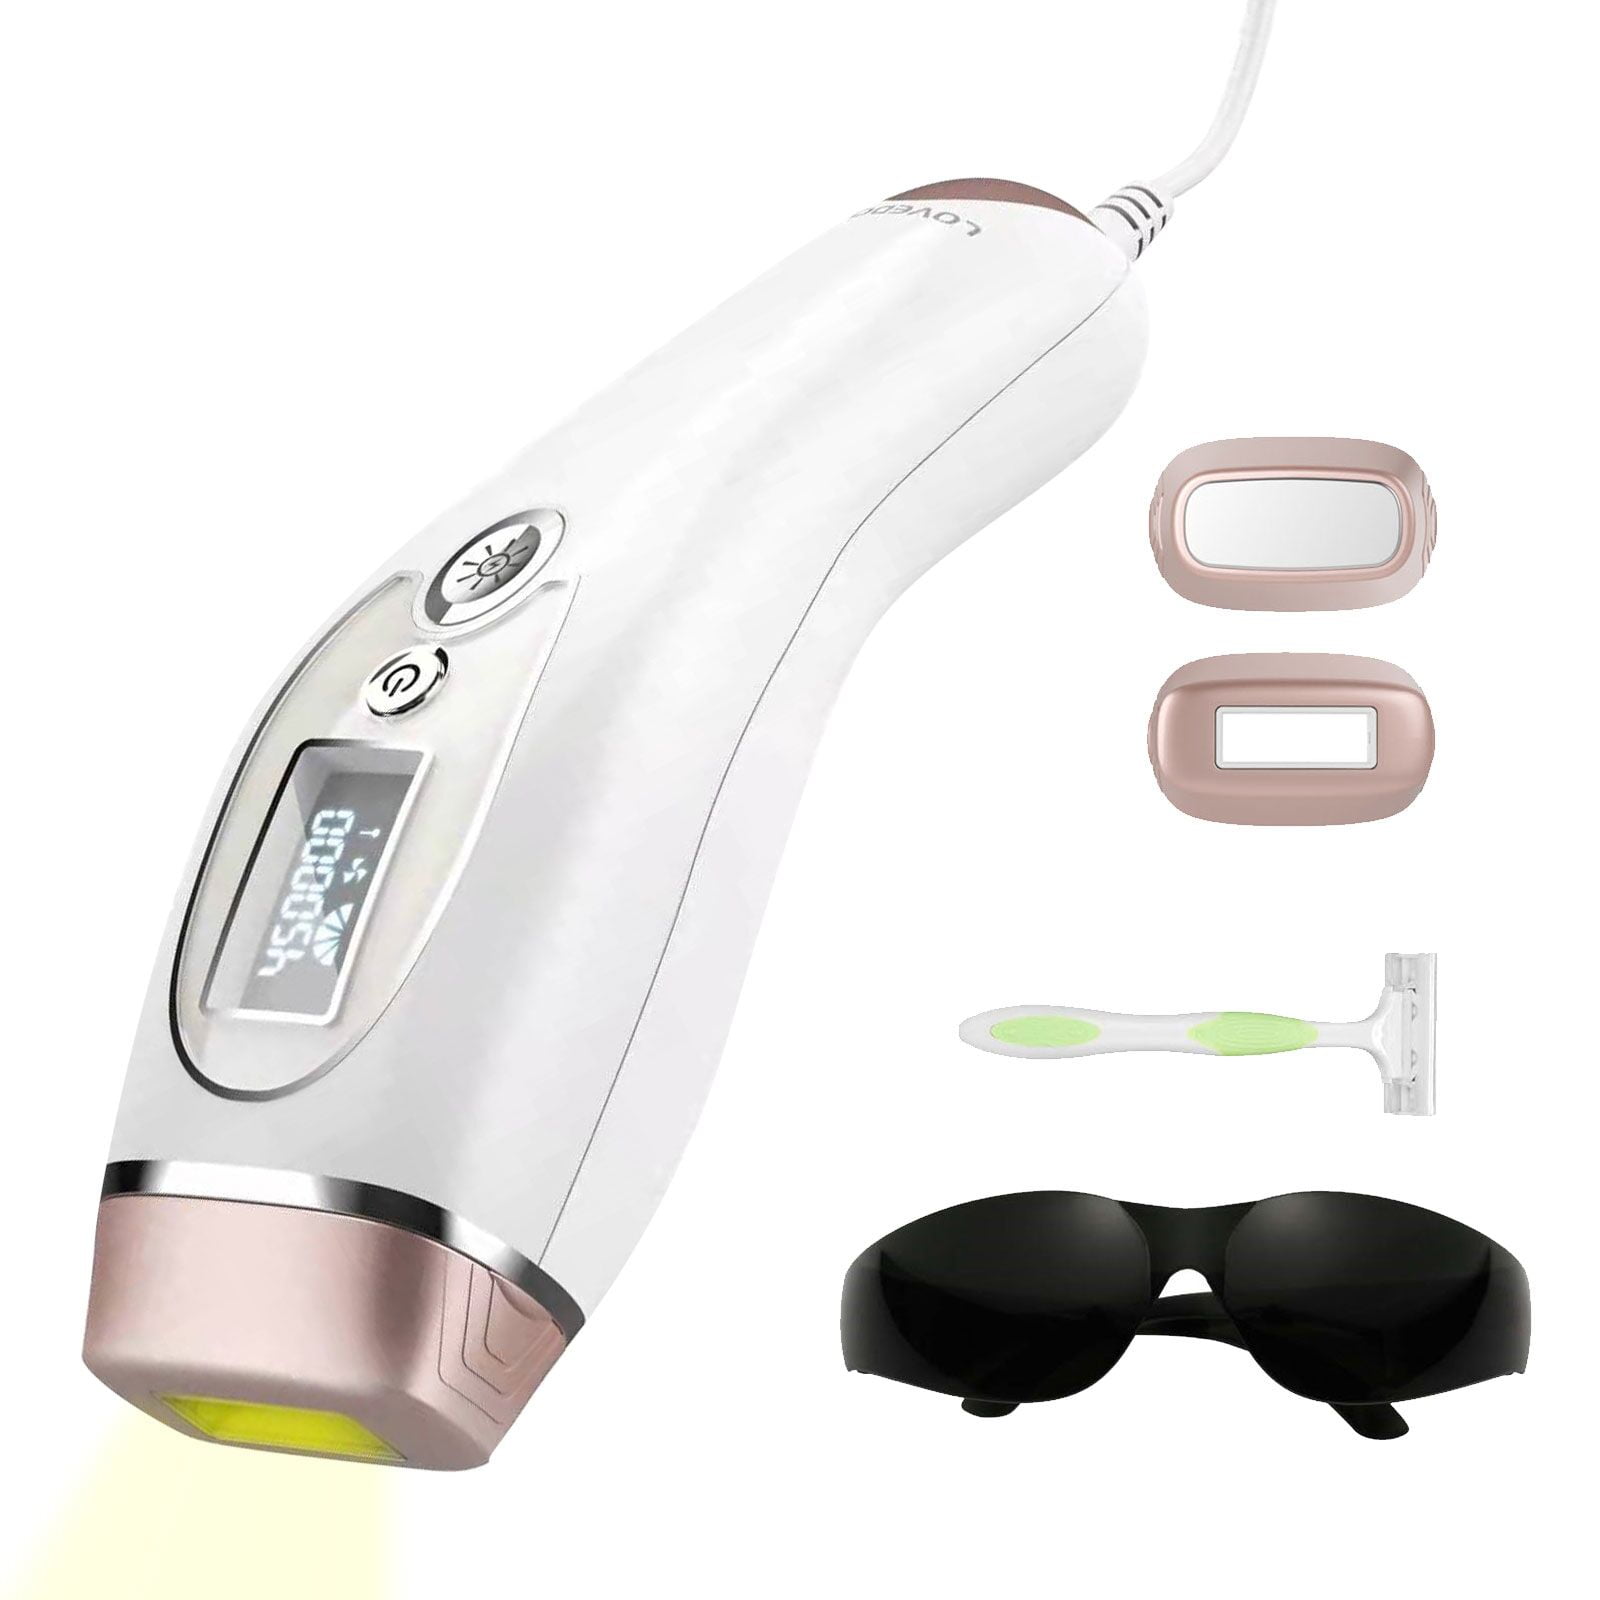 Laser Hair Removal Device, LOVE DOCK Facial Hair Removal for